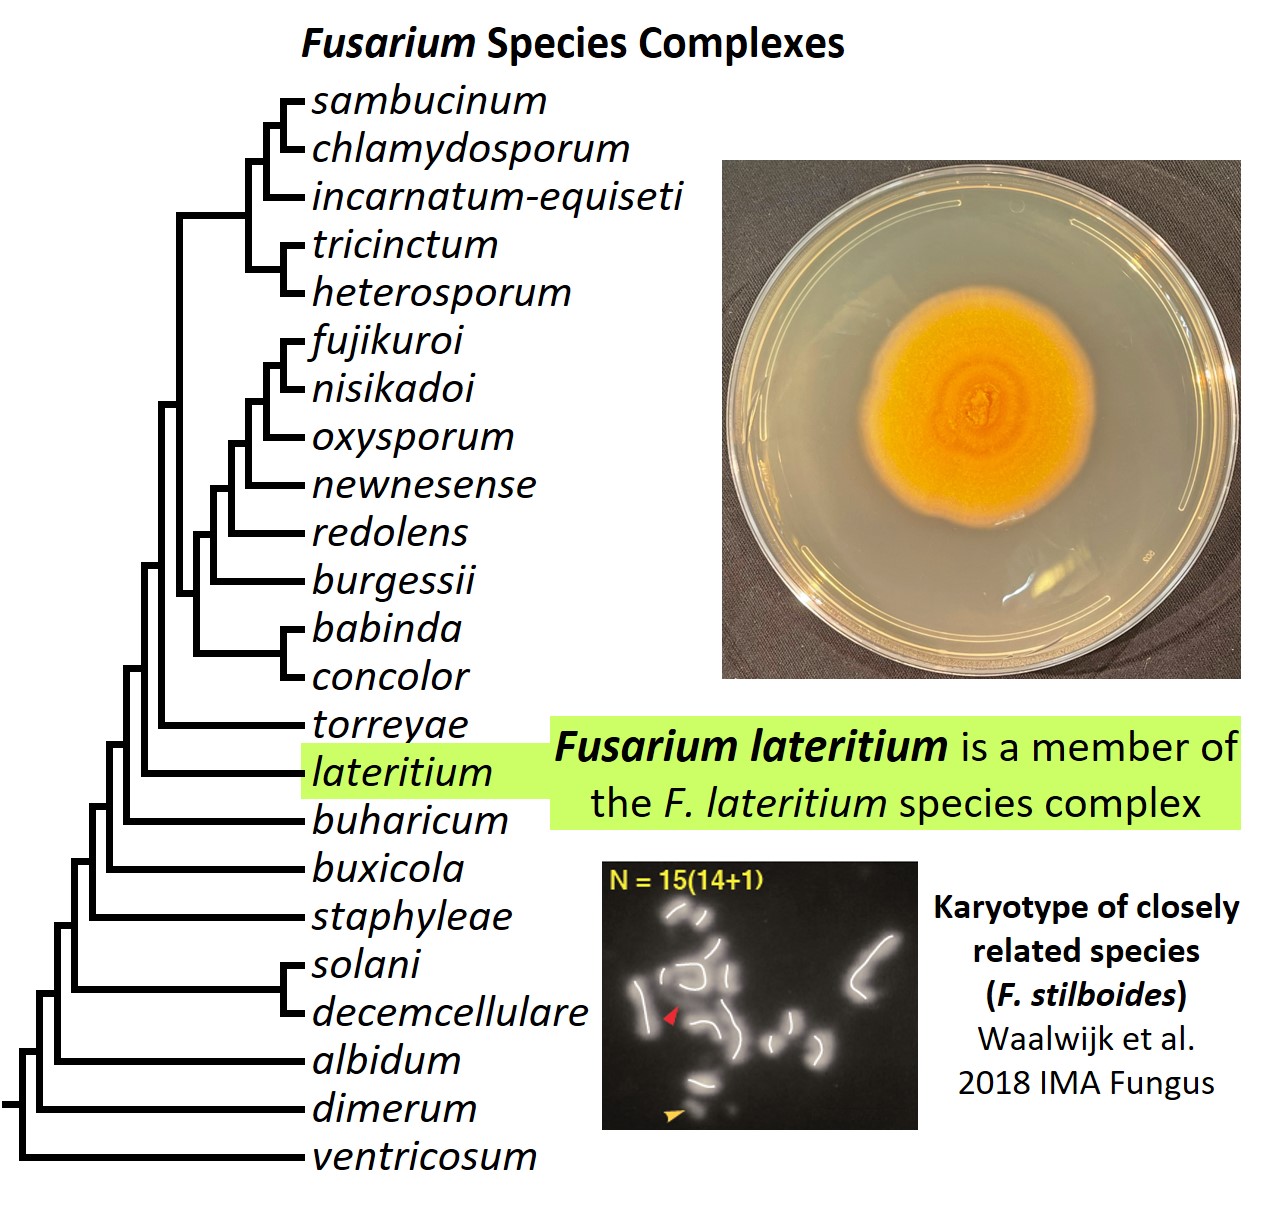 Left – tree showing phylogenetic relationships of the 23 Fusarium species complexes and placement of F. lateritium within the F. lateritium species complex. In the tree, species complex names are abbreviated using specific epithets of the species after which the complexes are named (e.g., the F. sambucinum species complex is abbreviated as sambucinum). Upper right – culture of F. lateritium NRRL 13622 growing on potato dextrose agar medium. Lower right – karyotype of F. lateritium NRRL 13622.